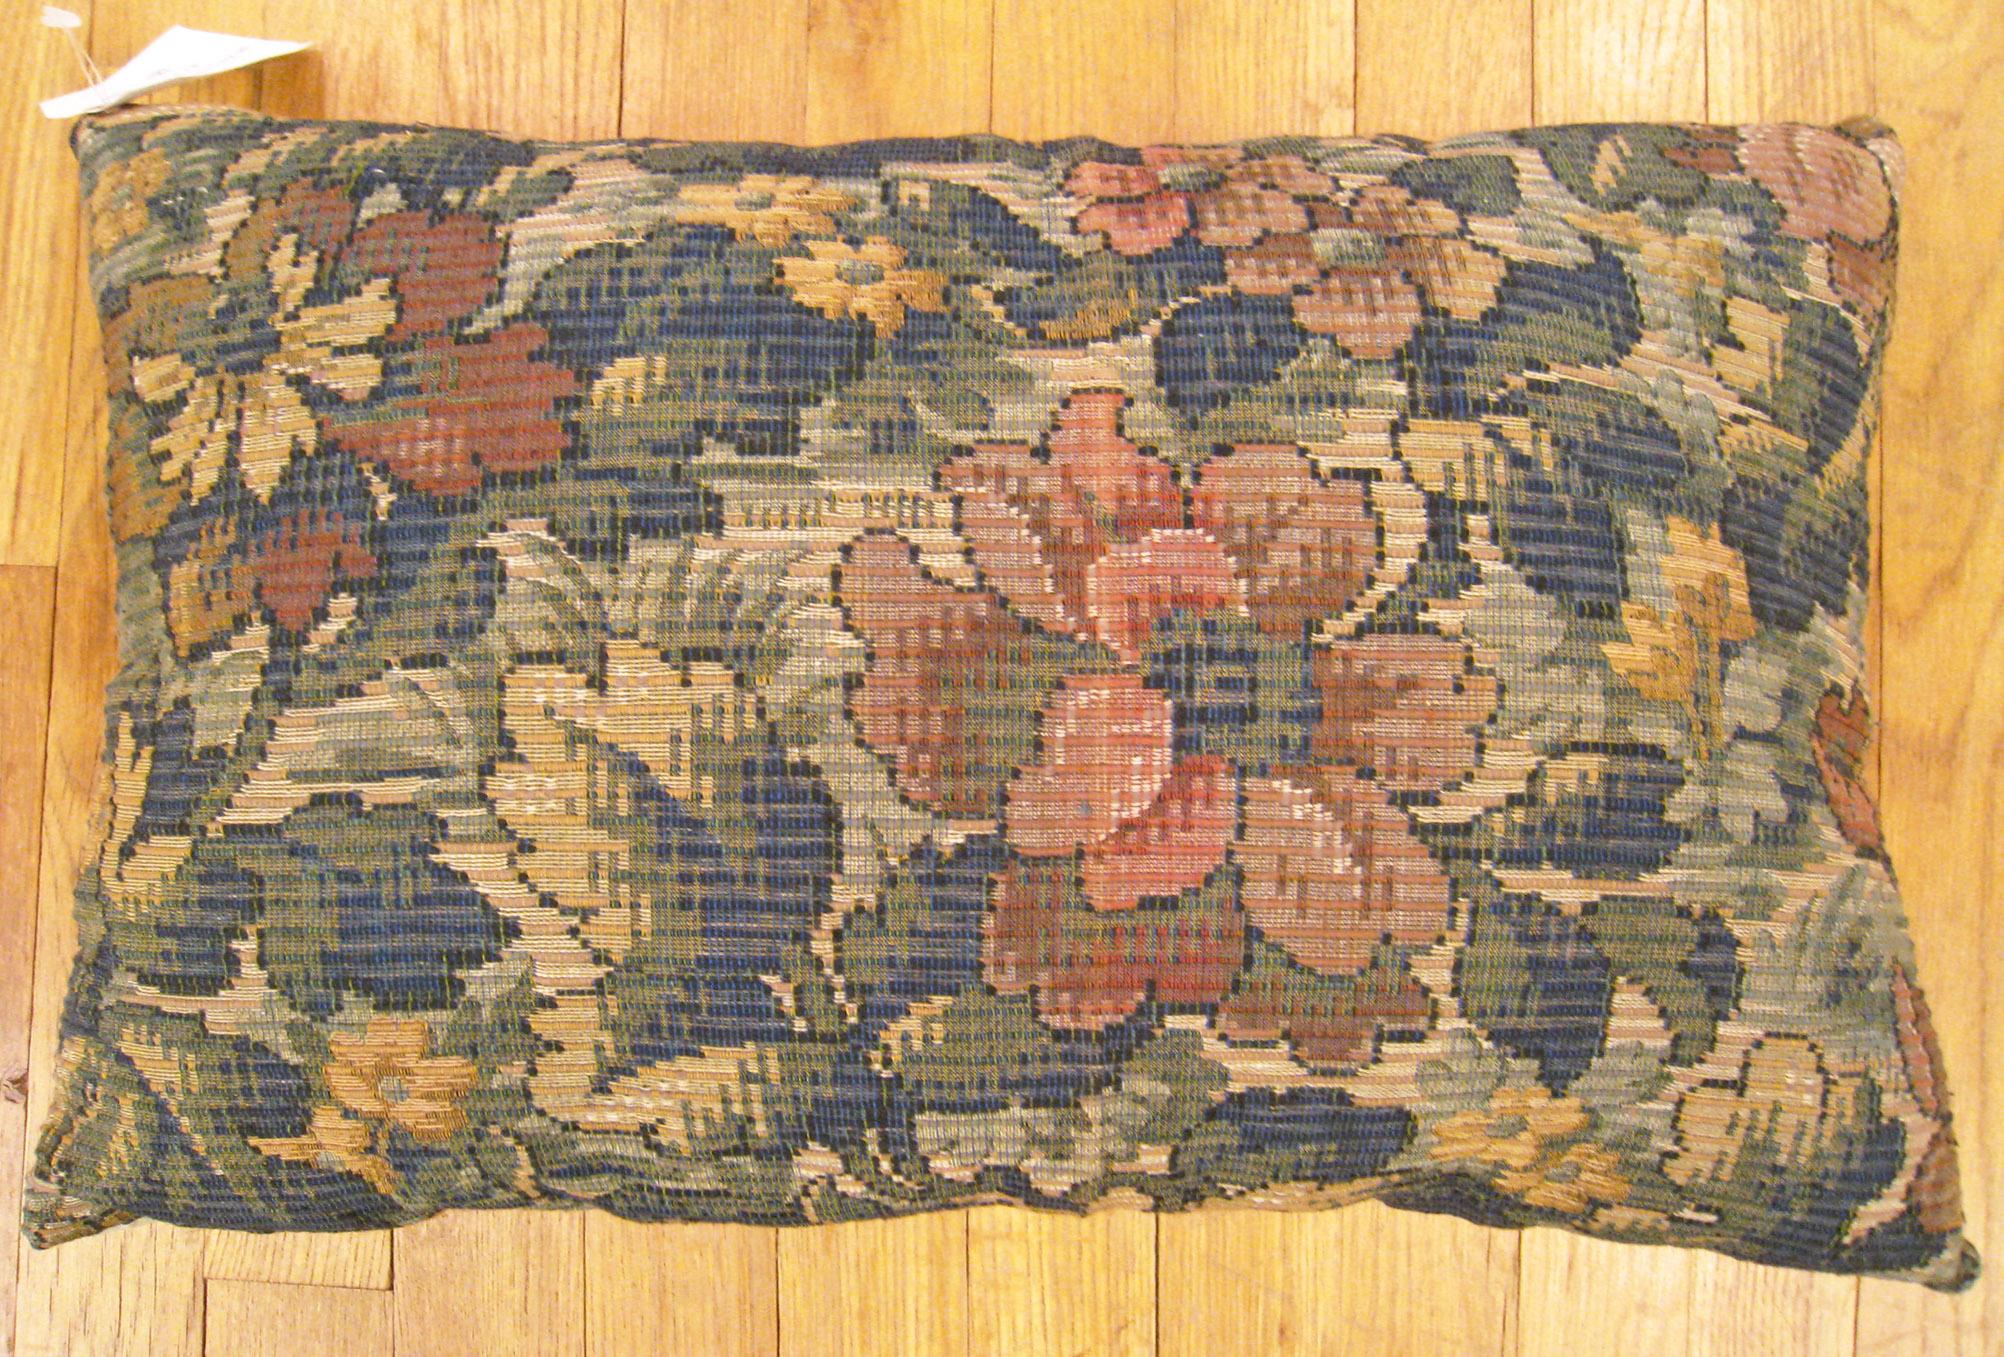 Antique Jacquard Tapestry pillow; size 1'2” x 1'8”.

An antique decorative pillow with floral elements allover a dusty rose central field, size 1'2